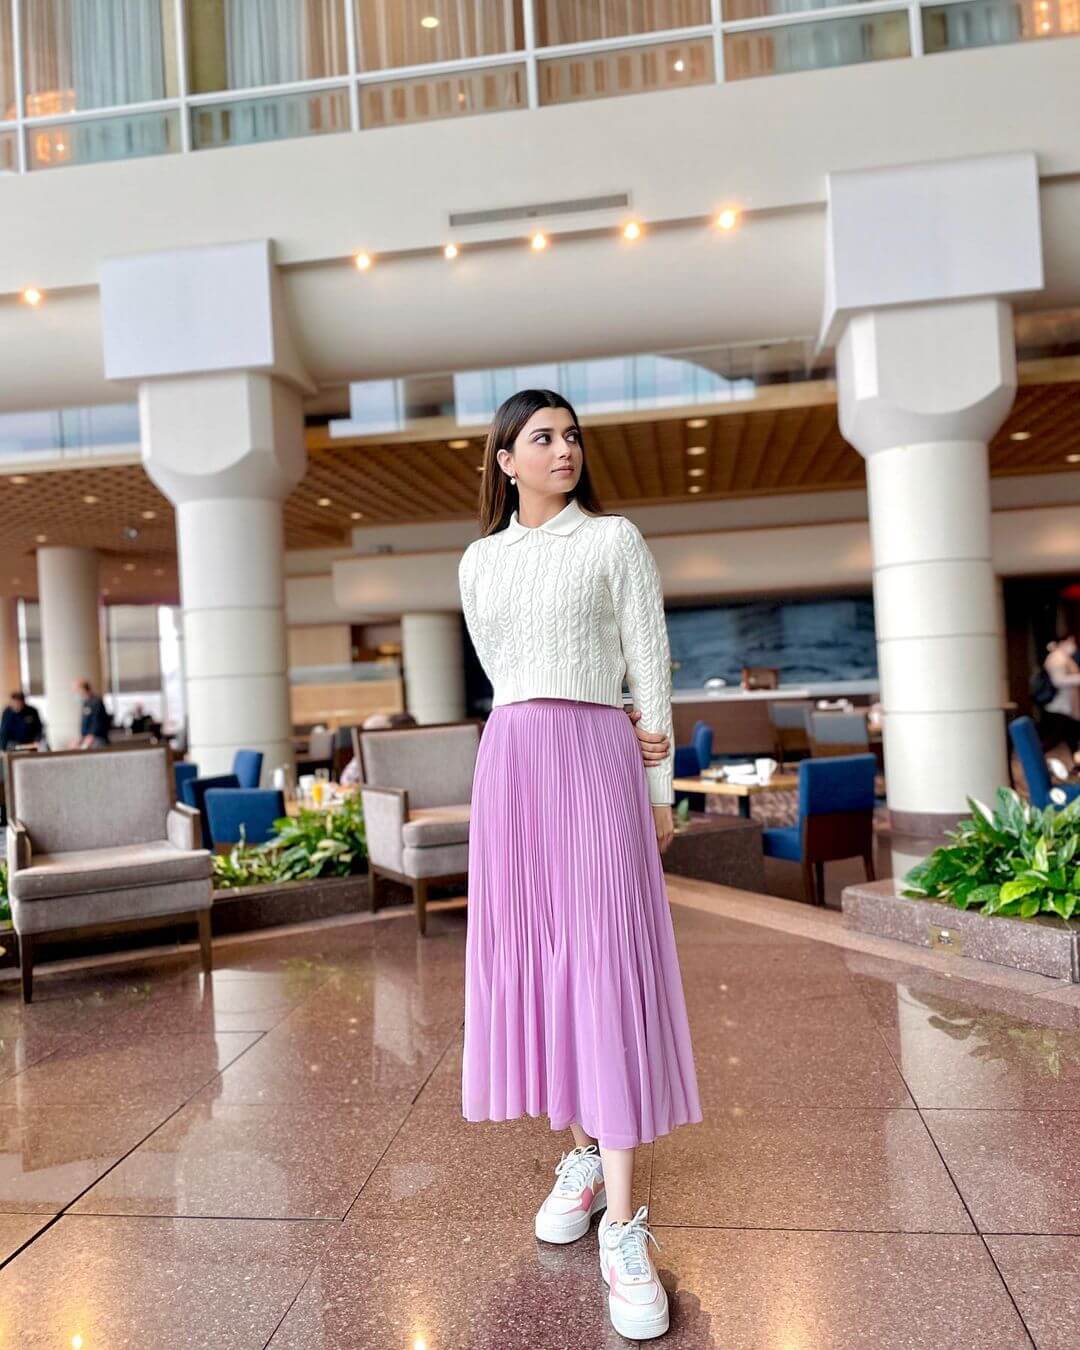 Nimrat Khaira Attractive Look In White Pullover With Purple Skirt Outfit Nimrat Khaira Desi And Classy Outfit